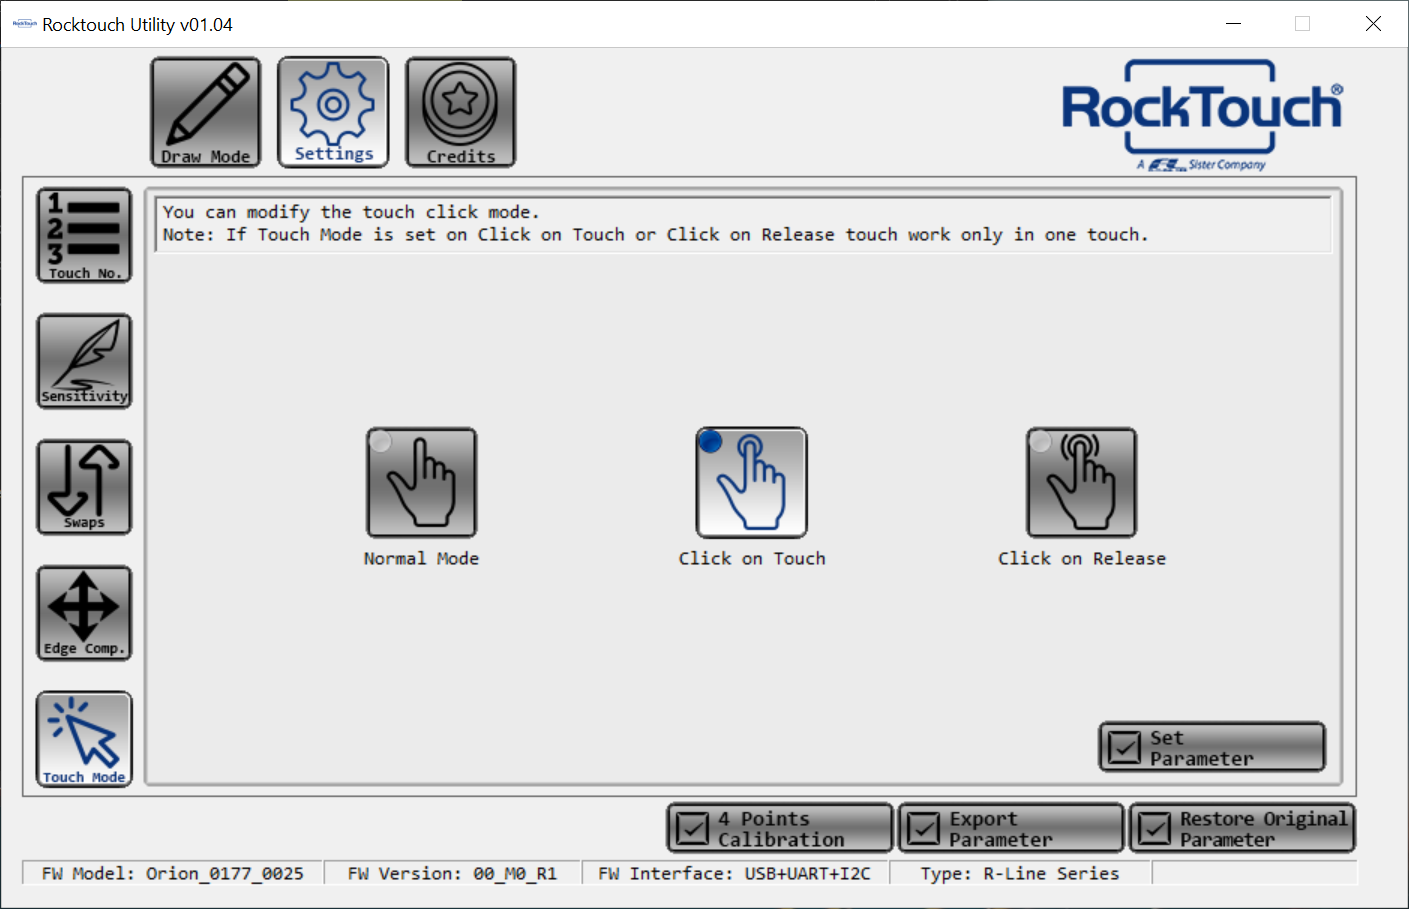 WYSIWYG - Rocktouch utility ver 01.04 „Touch Mode.”.png